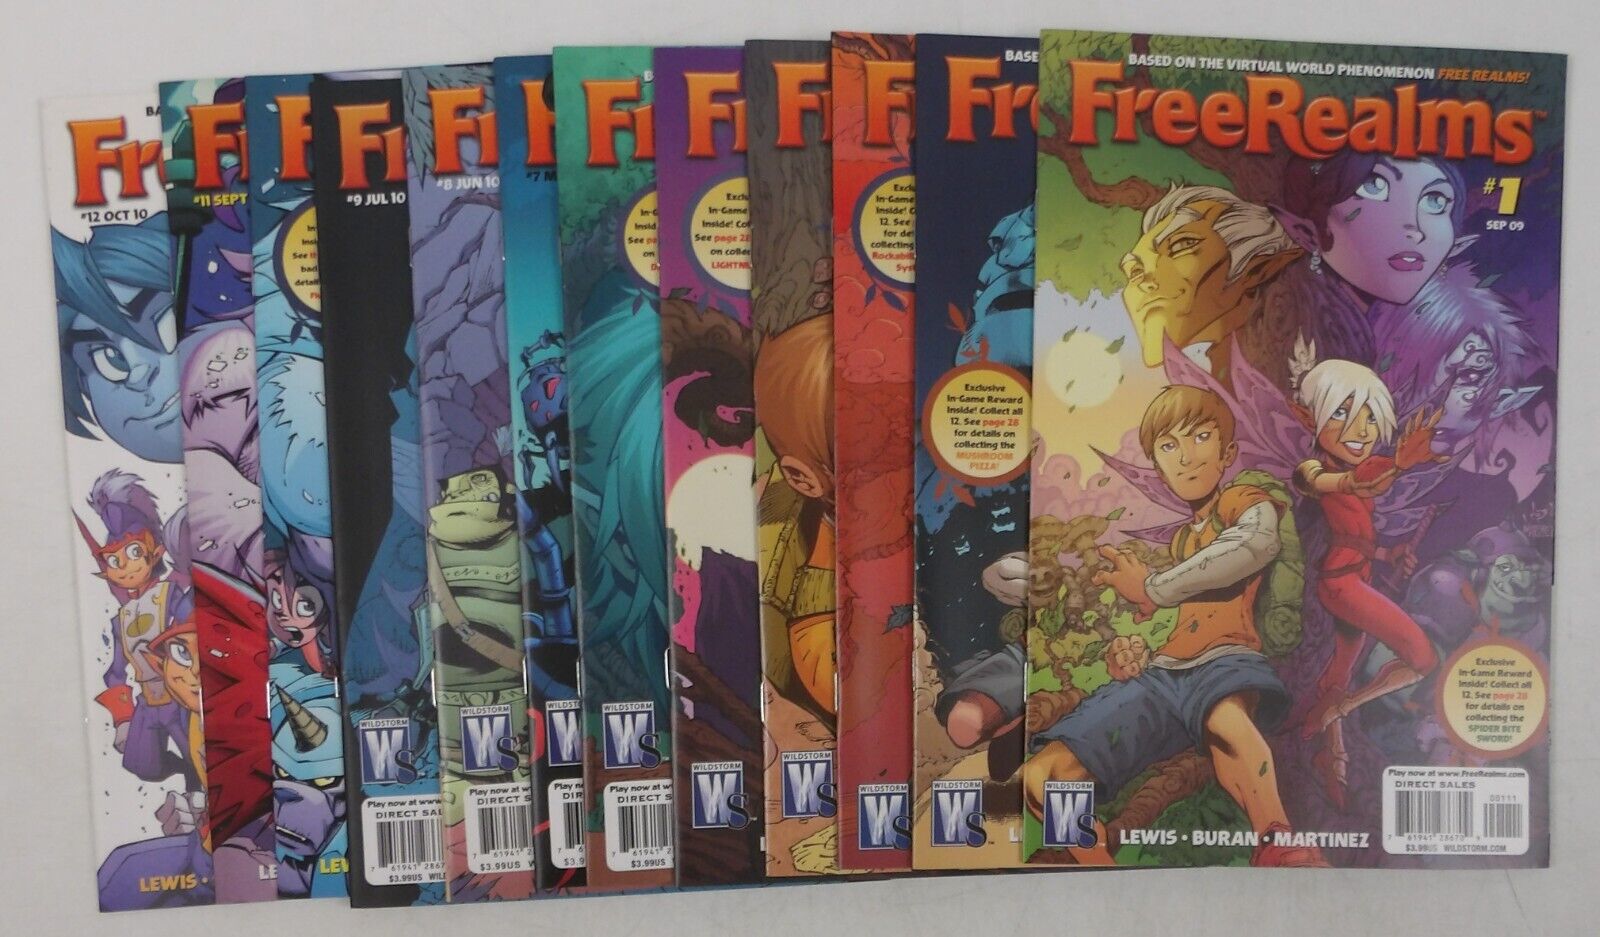 Free Realms #1-12 VF/NM complete series based on the MMORPG video game 8 9 10 11